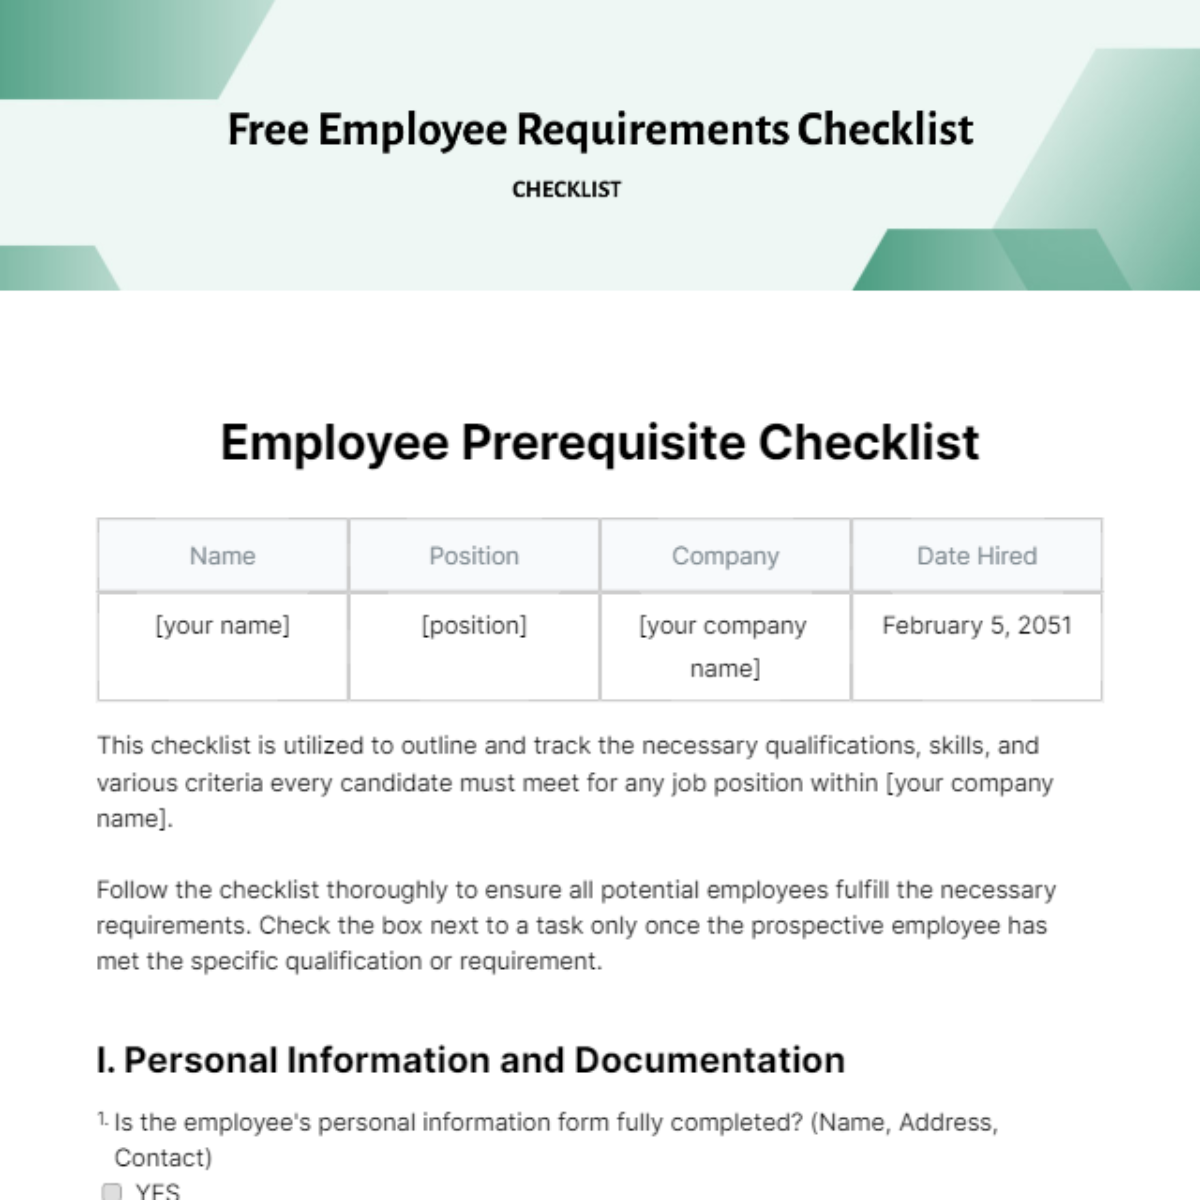 FREE Employee Checklist Templates & Examples - Edit Online & Download ...